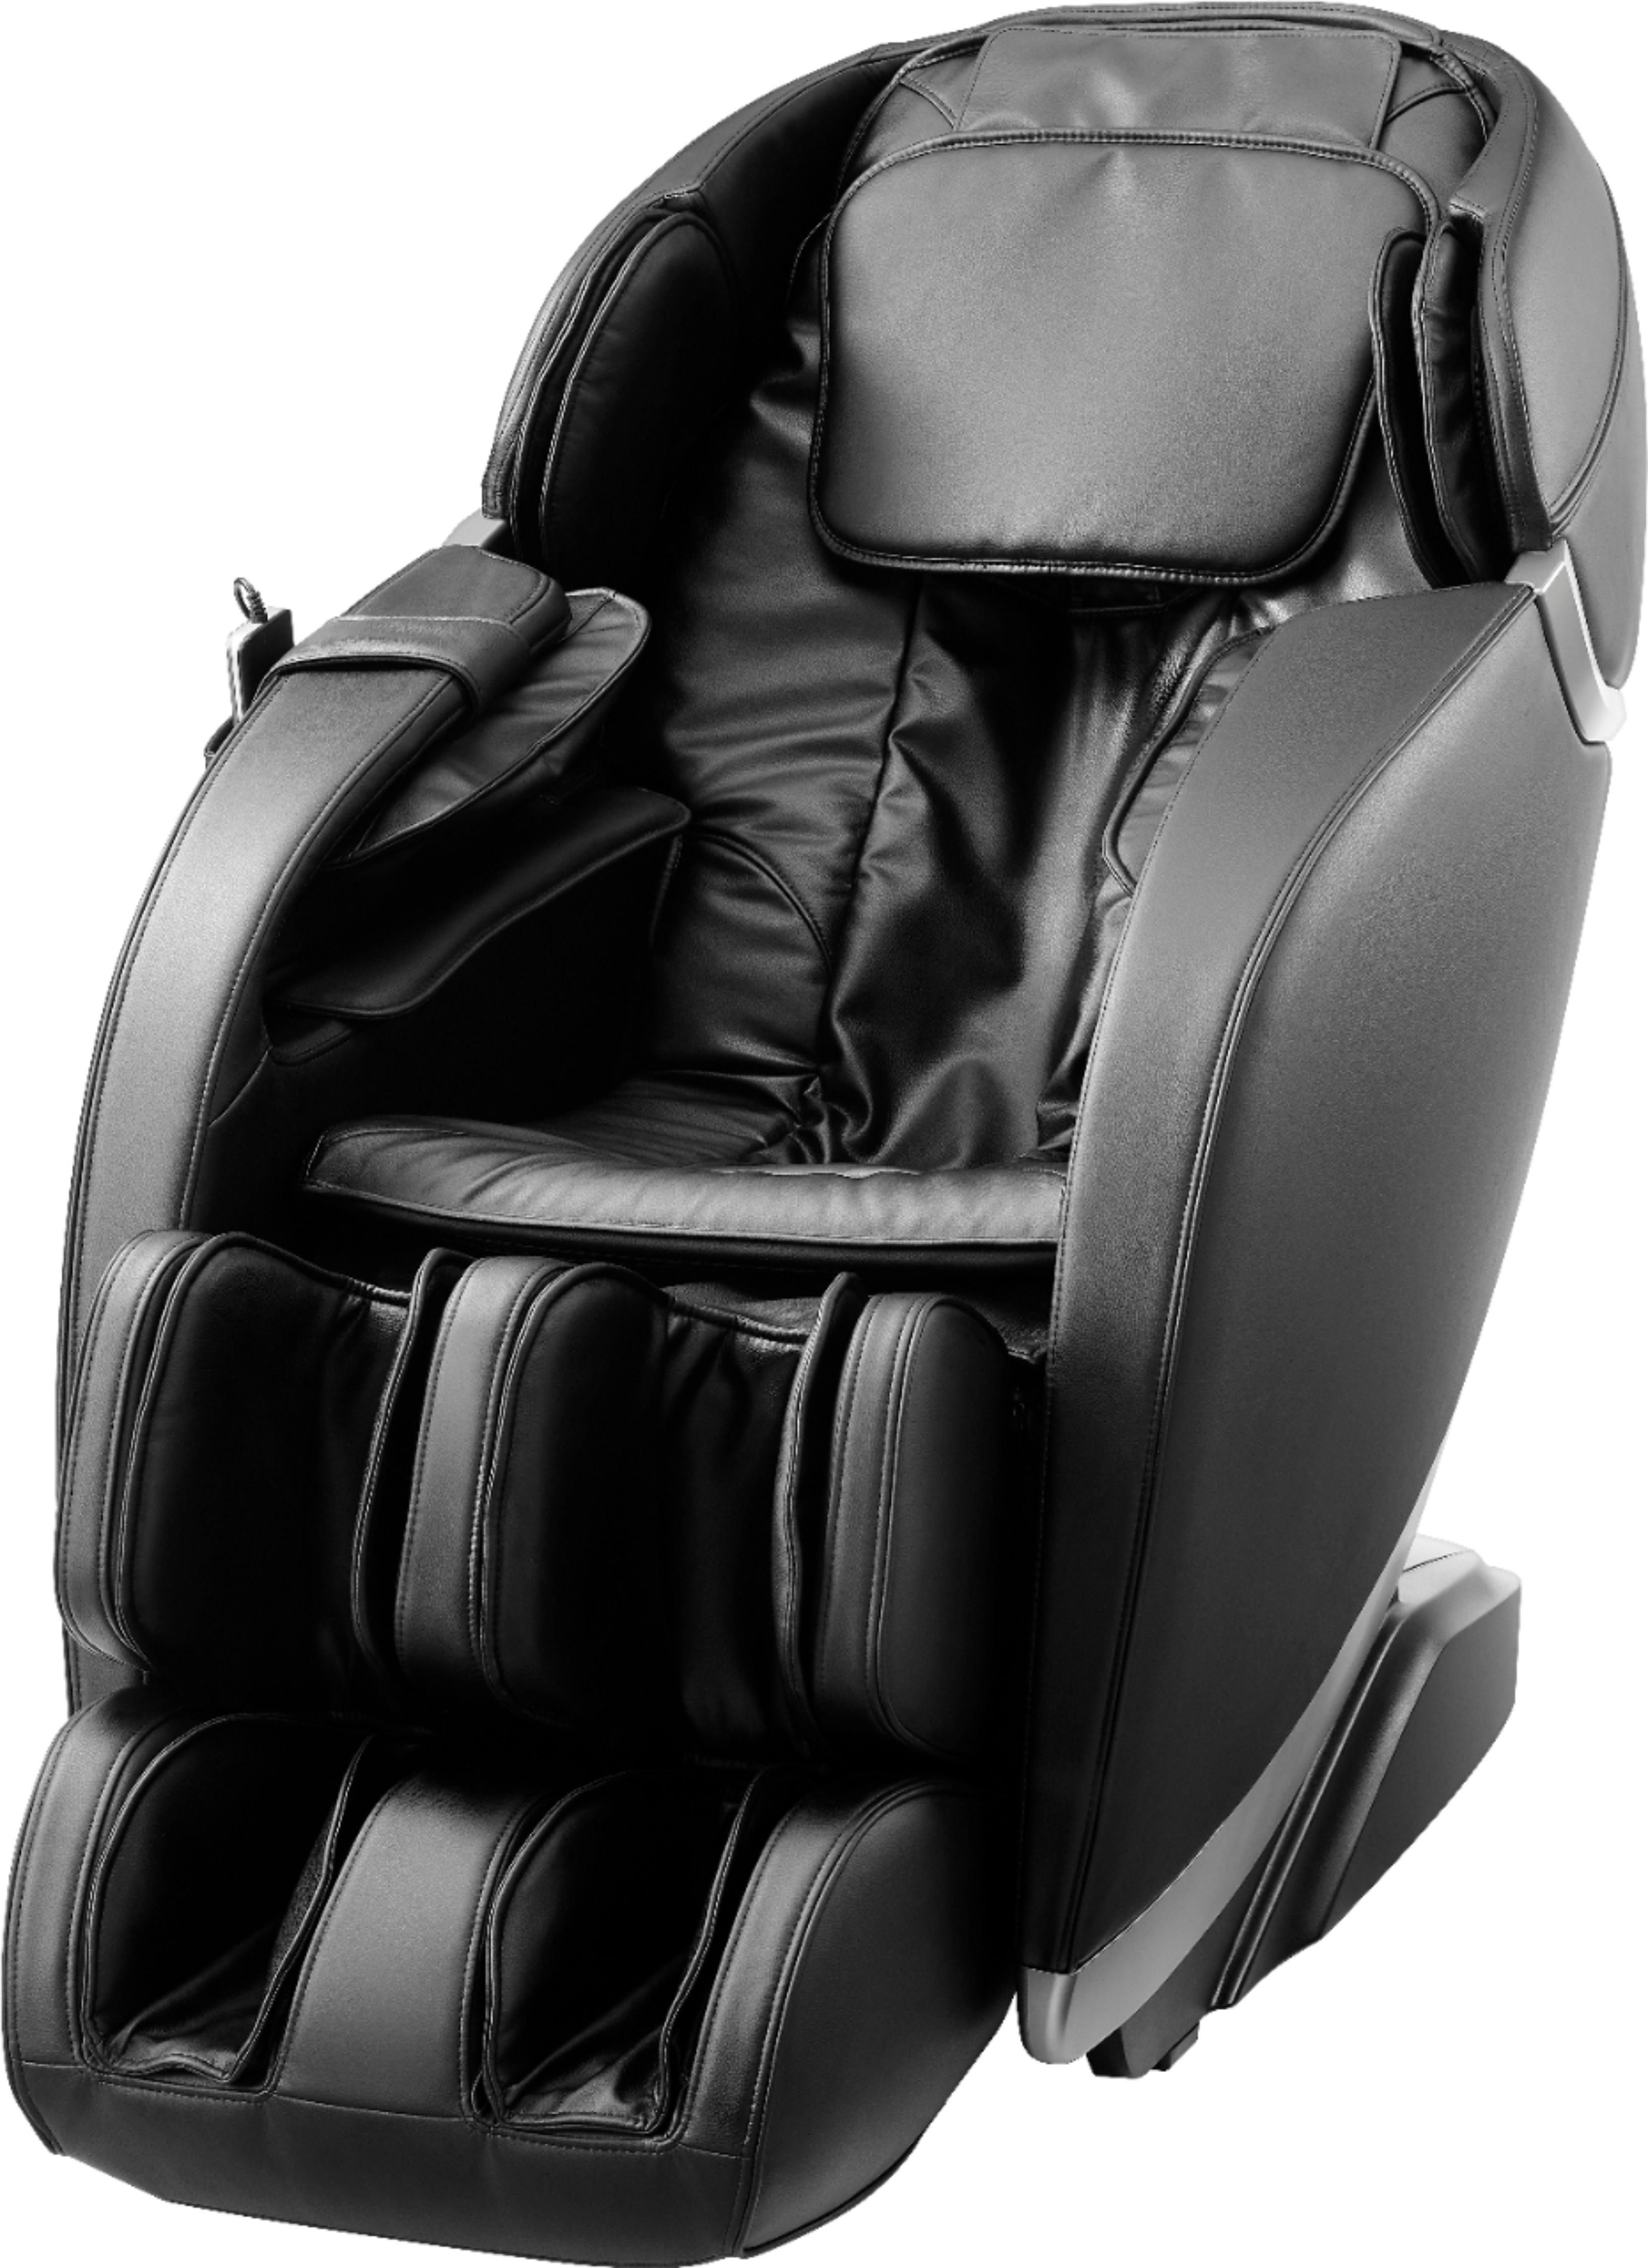 What Are the Basic Components of a Massage Chair? – Massage Chair Heaven